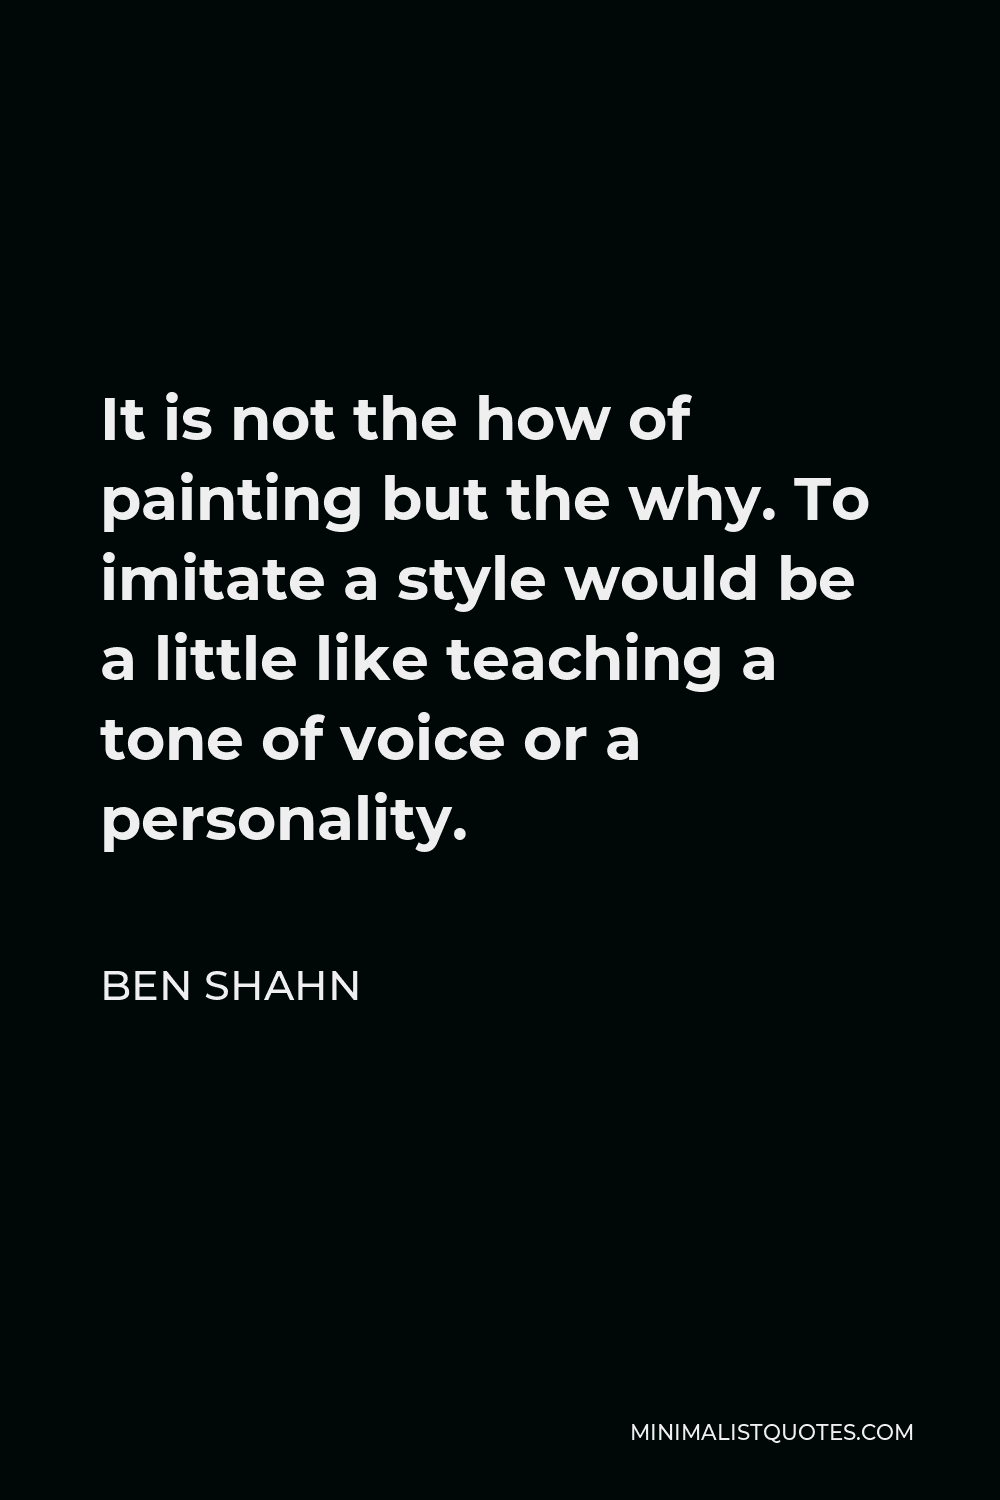 Ben Shahn Quote - It is not the how of painting but the why. To imitate a style would be a little like teaching a tone of voice or a personality.